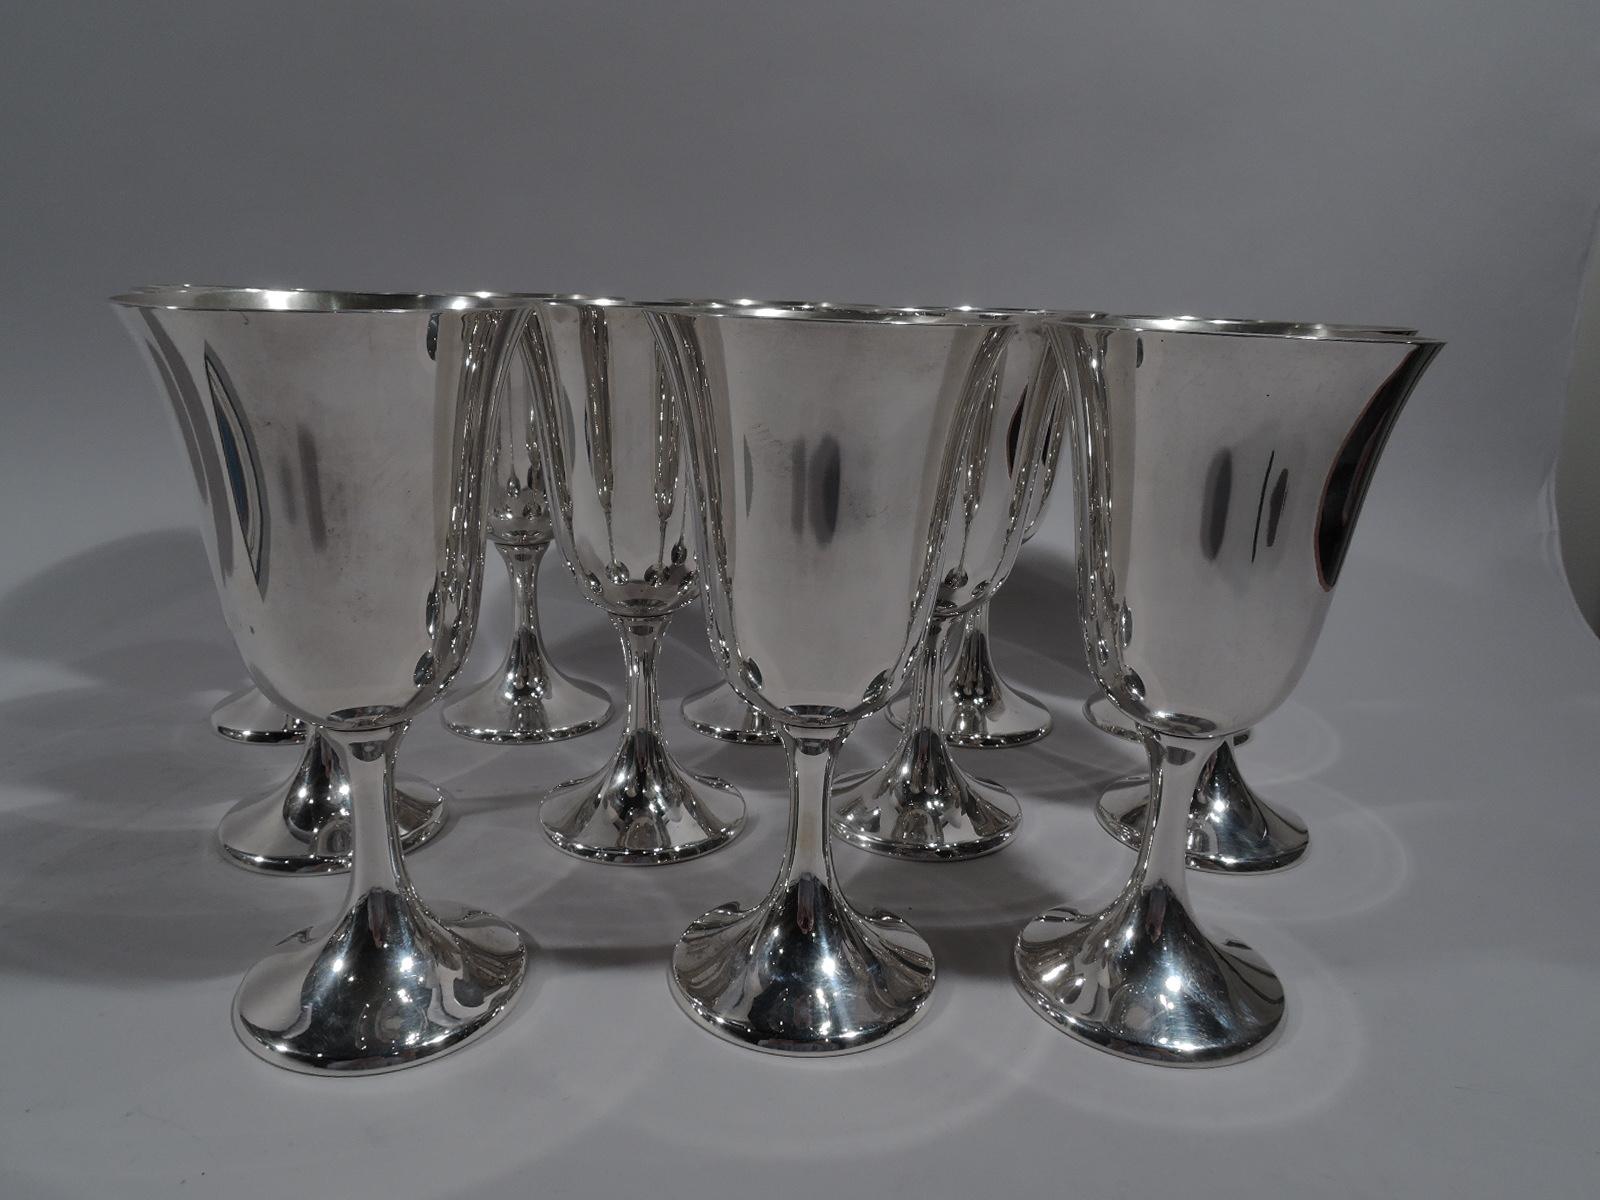 Set of 12 American modern sterling silver goblets. Made by Manchester in Providence. Each: Tall and flared bowl on spool stem flowing into raised foot. Fully marked and numbered 808. Total weight: 60 troy ounces.